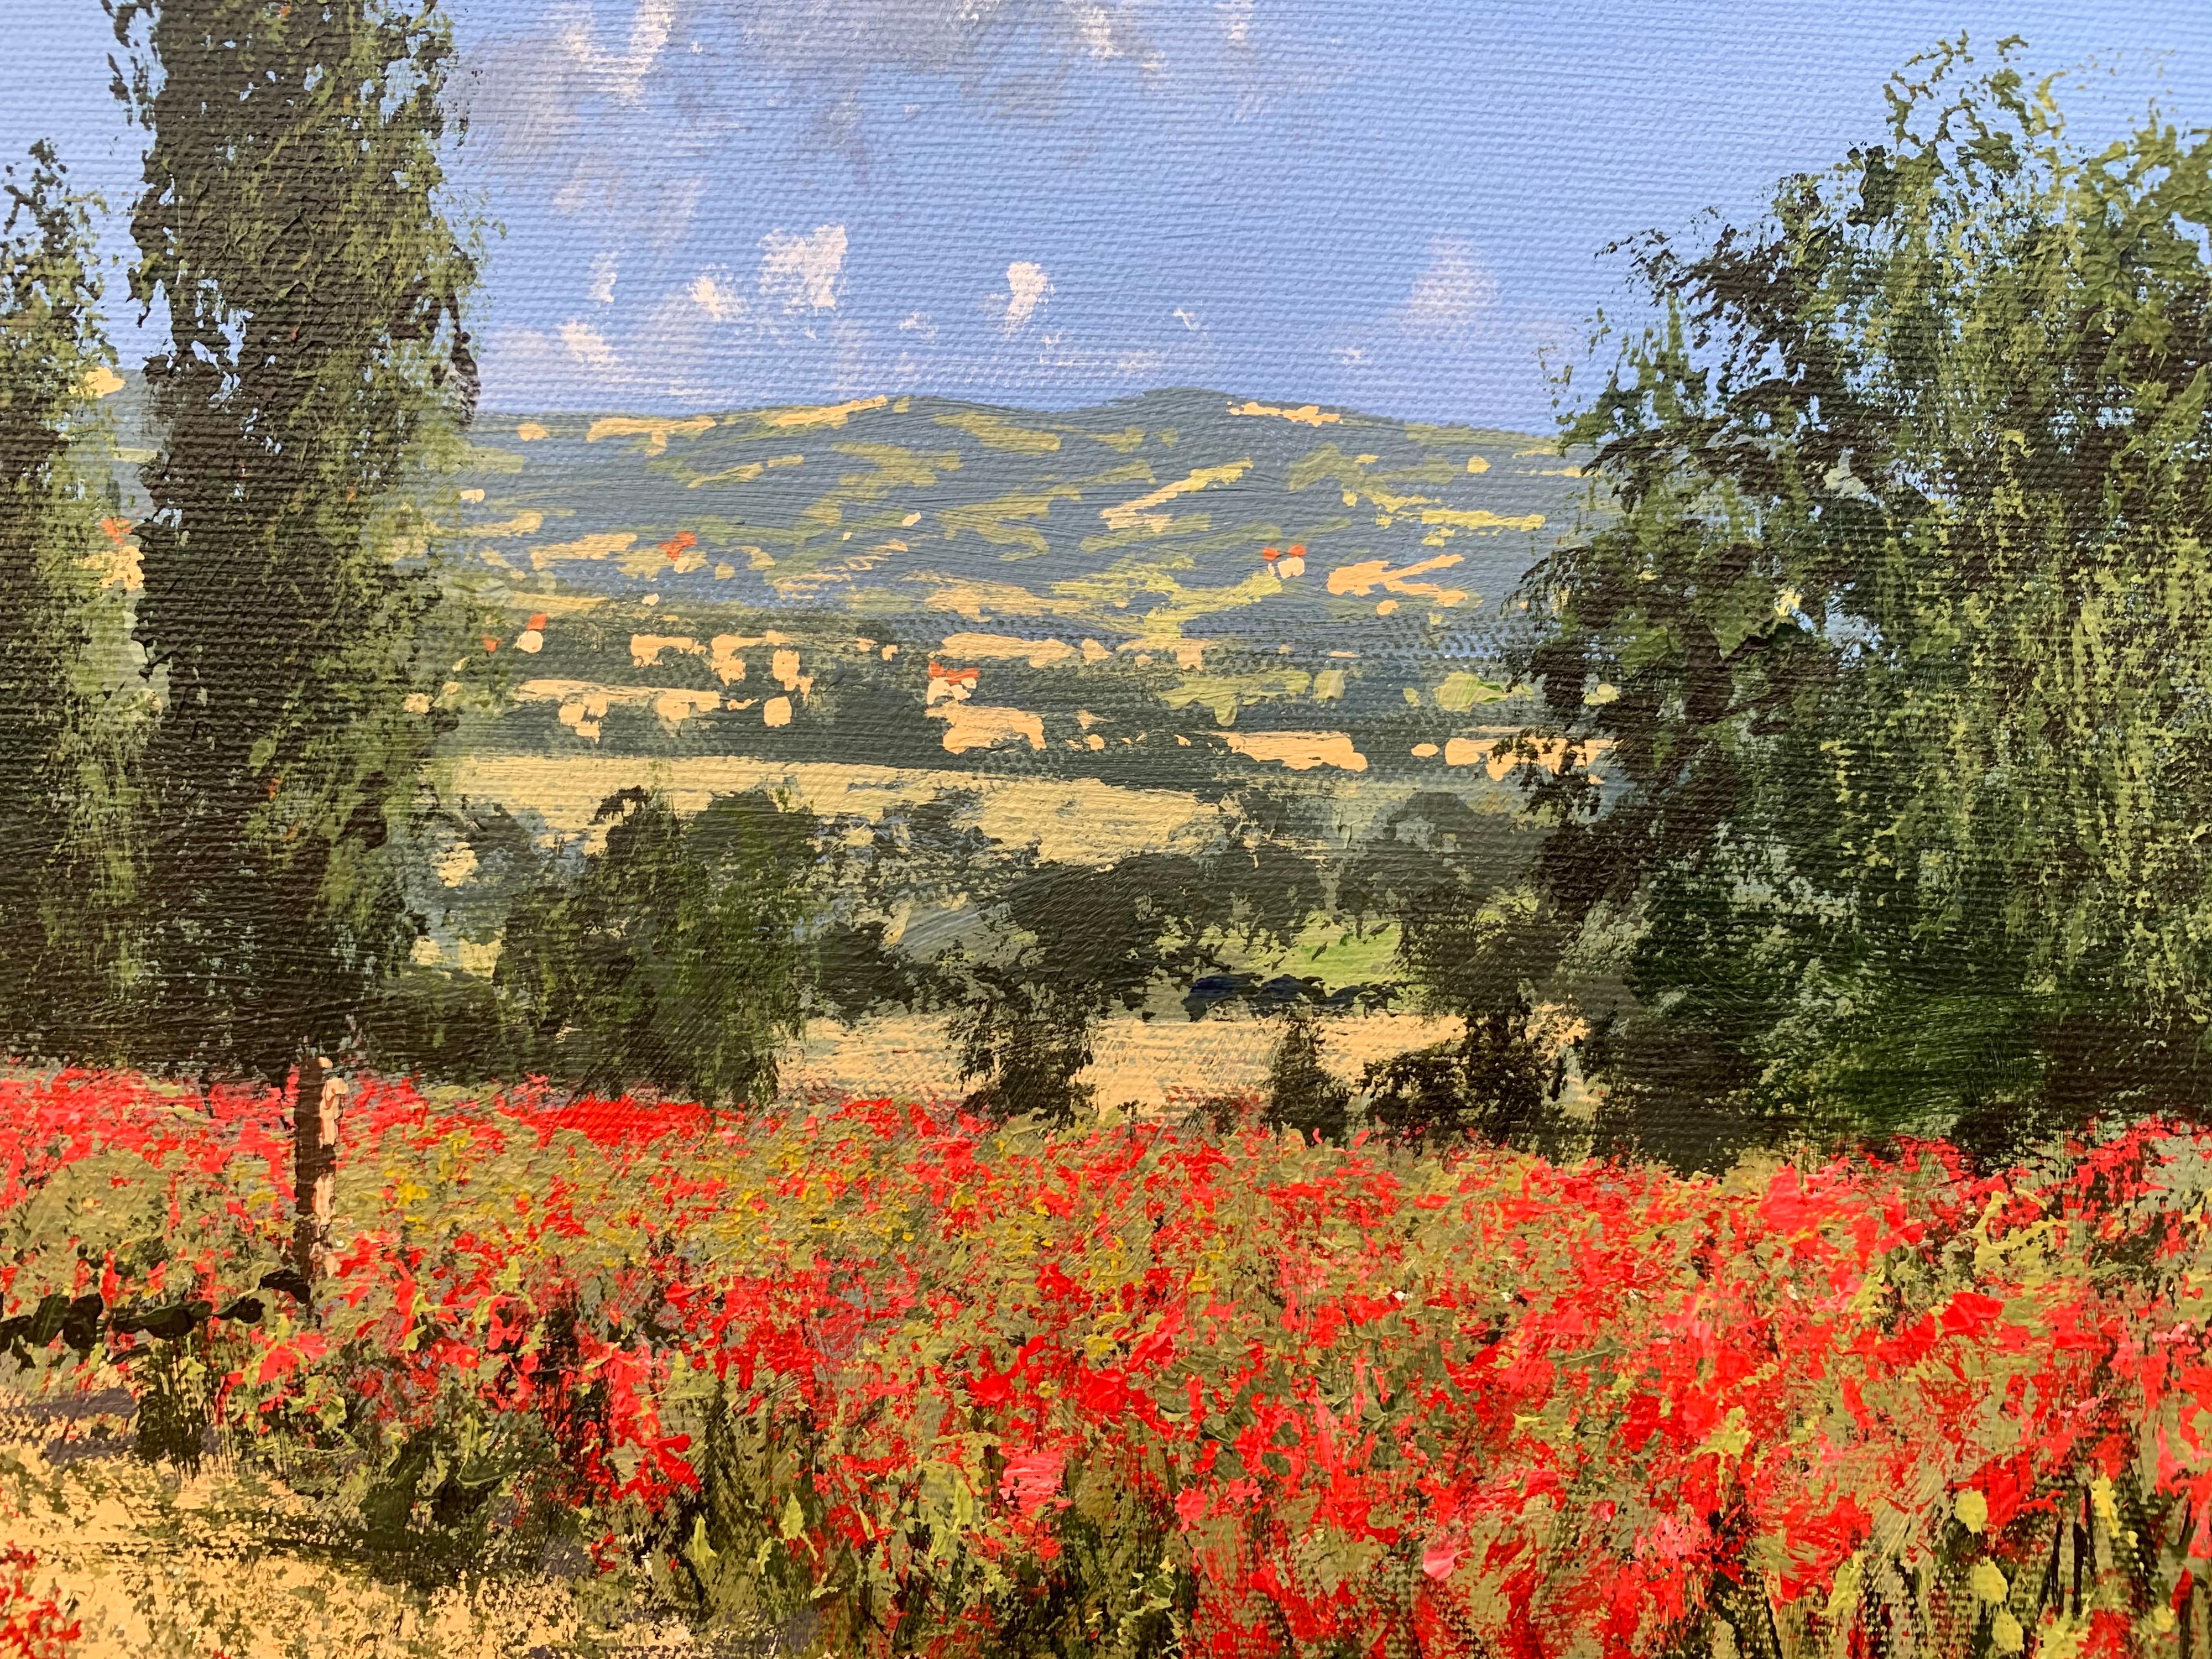 Bright Red Poppy Field in the Sunshine in Europe by Contemporary British Artist, Tim Layzell

Art measures 36 x 28 inches (box canvas)

Tim Layzell was born in 1981 and now lives and works in England. He has established himself as one of the world's